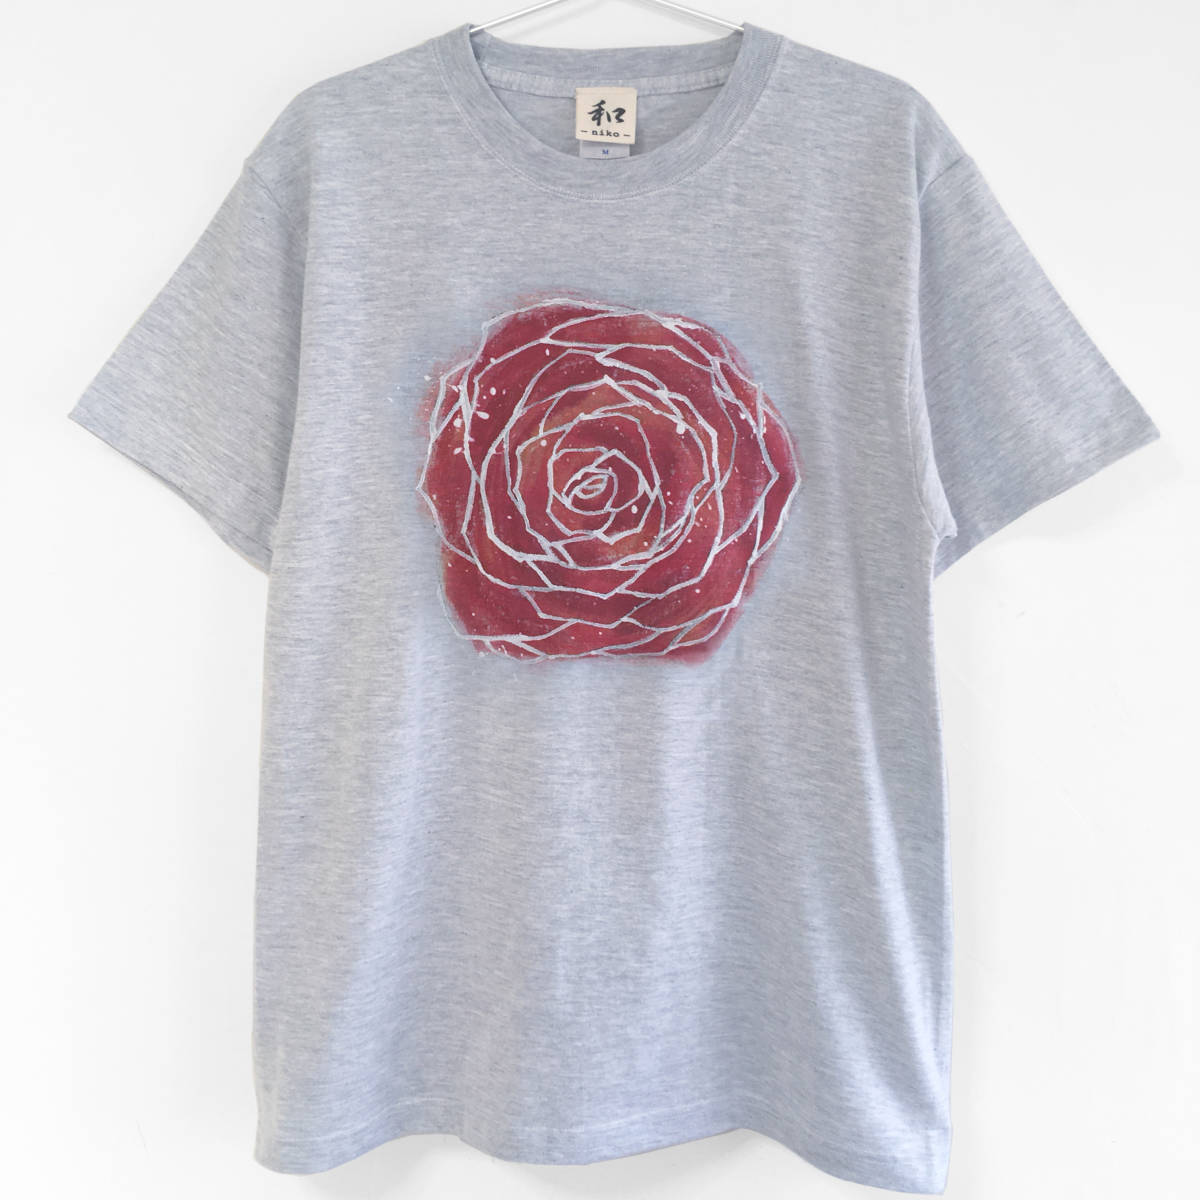 Men's T-shirt L Size Rose Flower Pattern Hand Painted T-Shirt Casual Rose Watercolor Christmas, L size, round neck, patterned